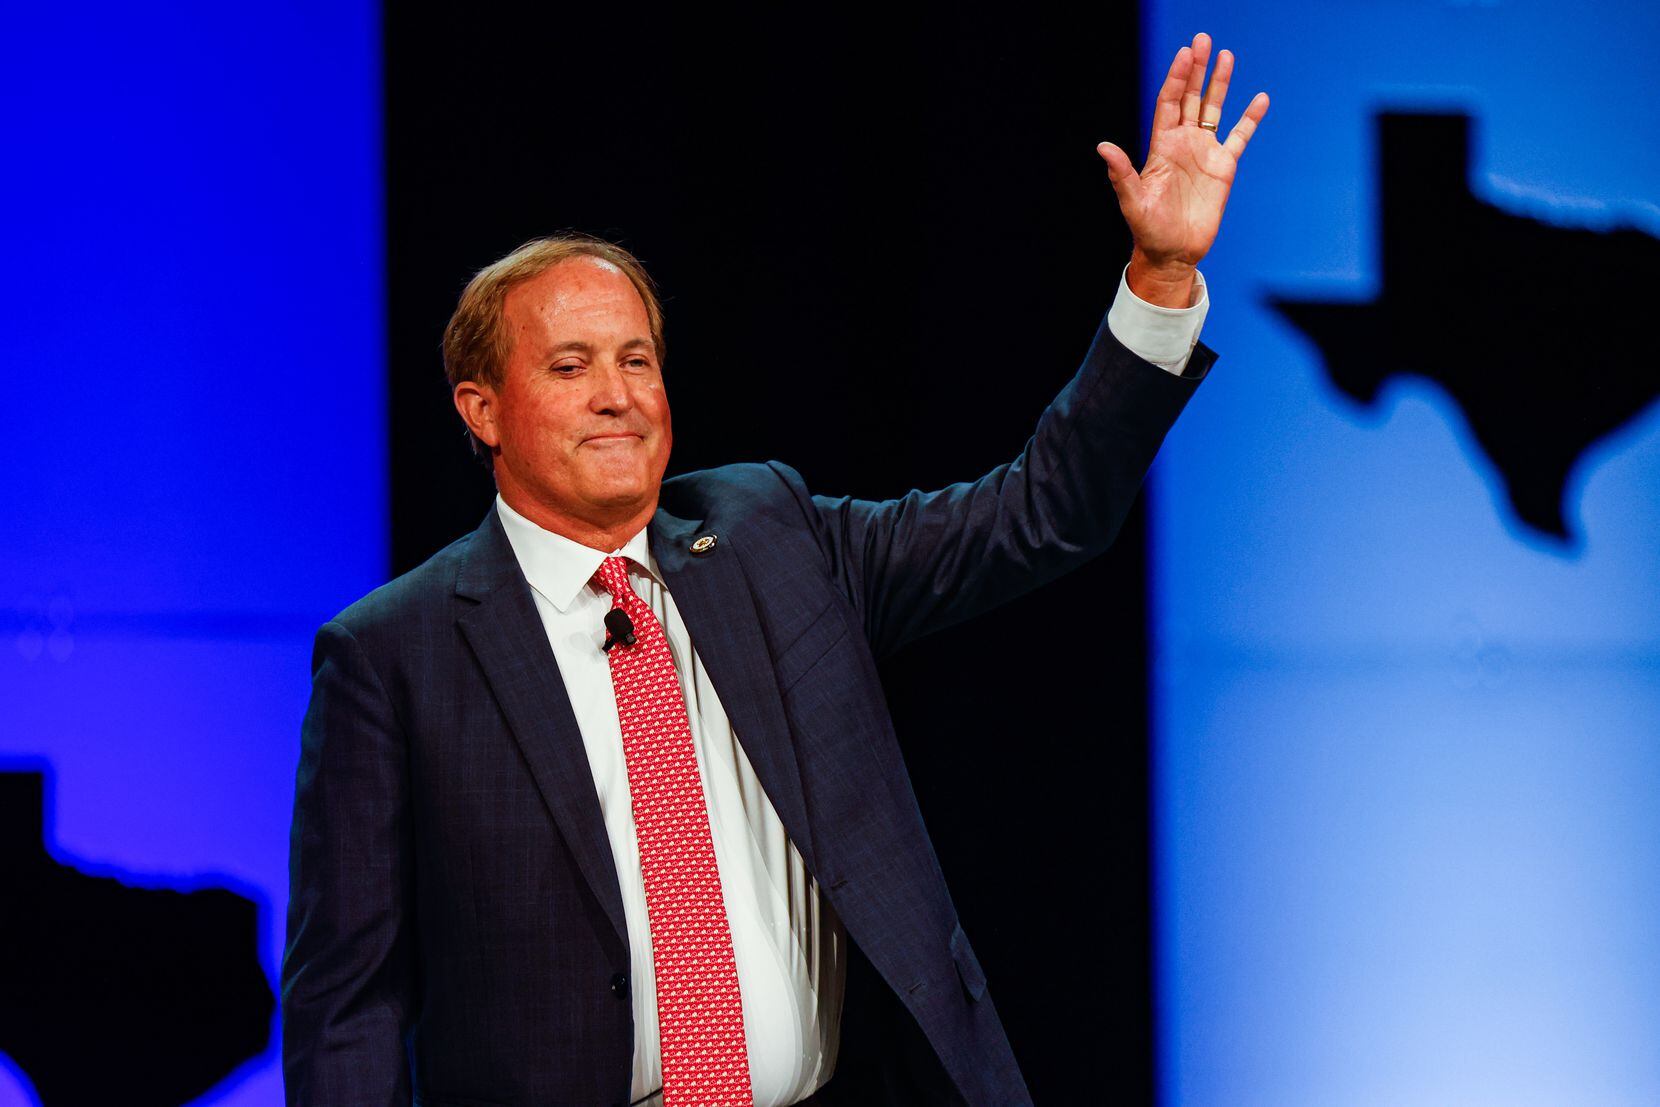 Texas Attorney General Ken Paxton gave a speech during a general meeting as part of the 2022...